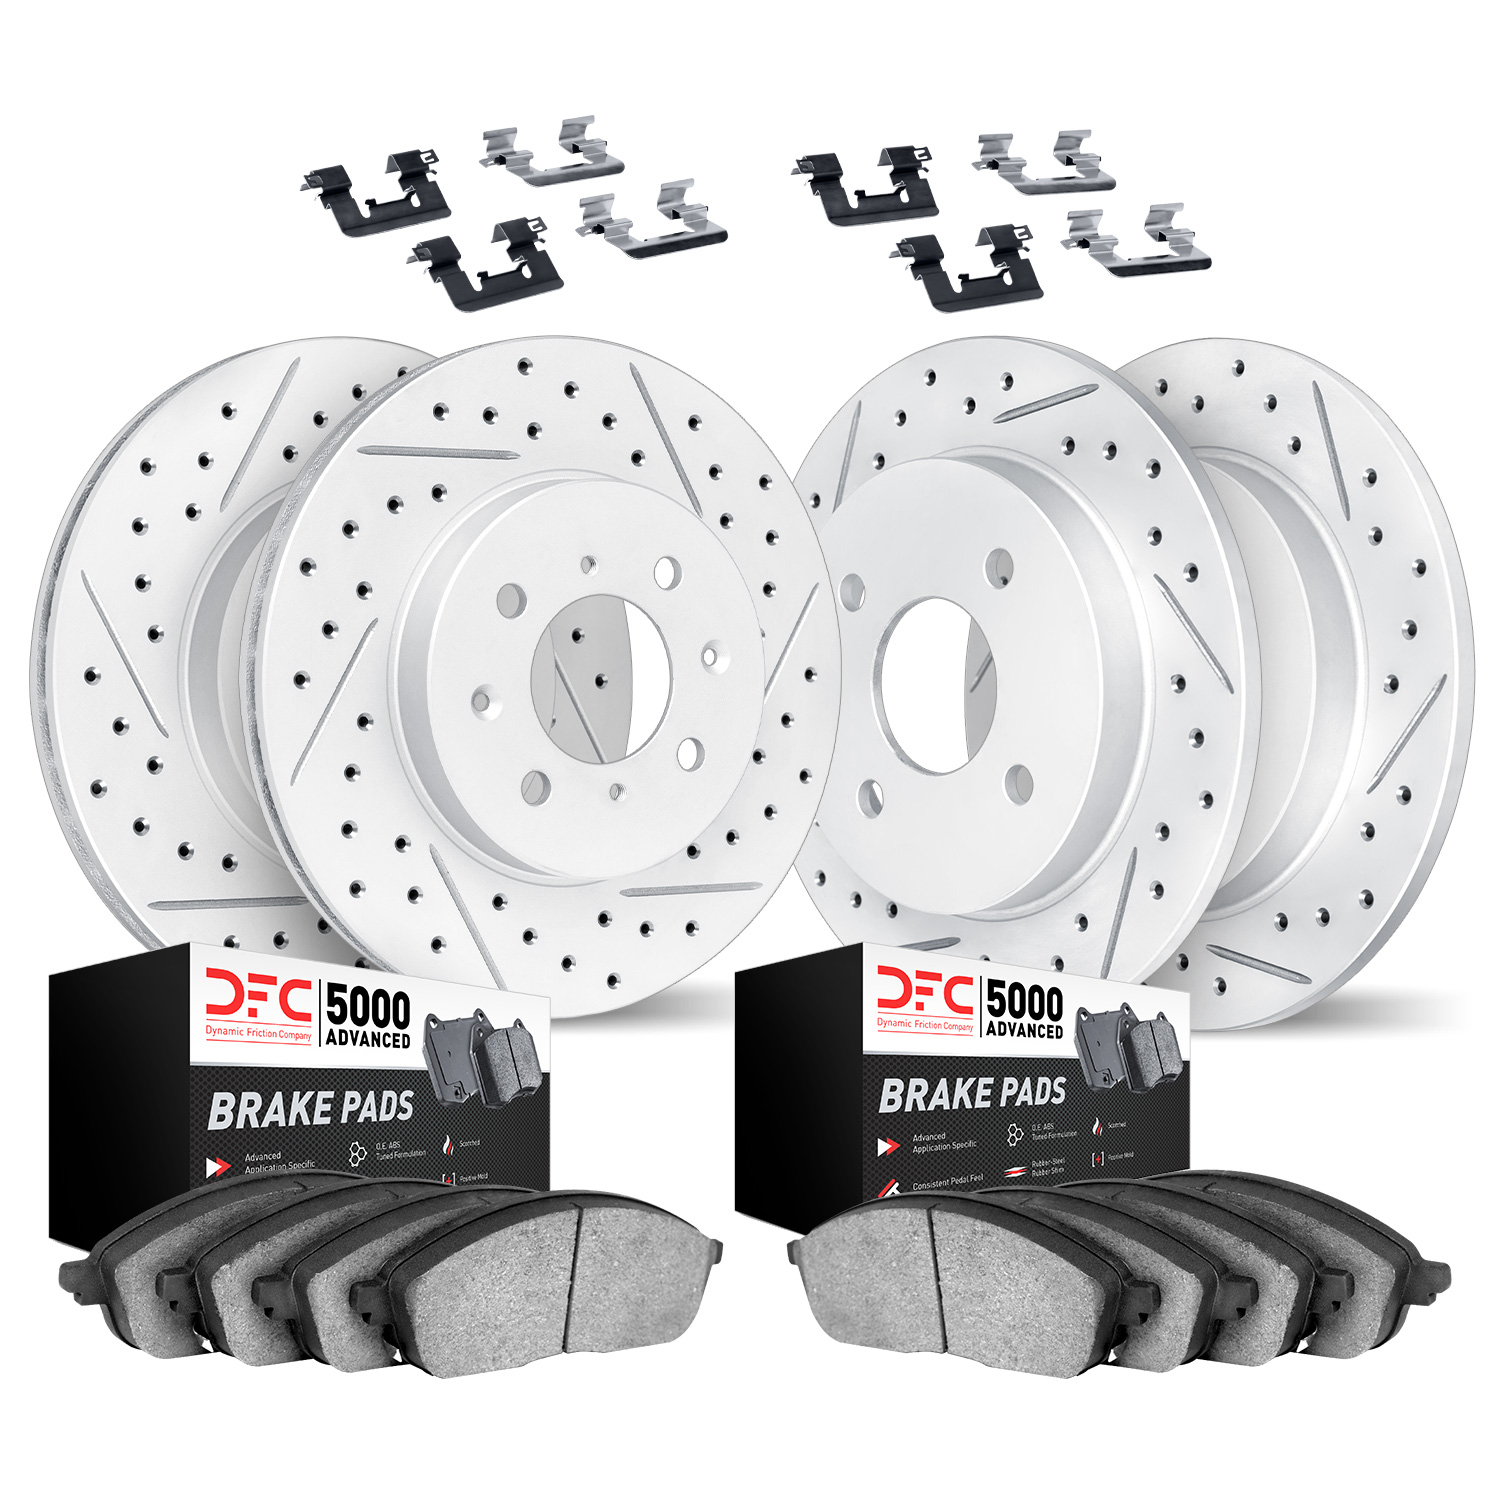 2514-07000 Geoperformance Drilled/Slotted Rotors w/5000 Advanced Brake Pads Kit & Hardware, 2012-2019 Mopar, Position: Front and